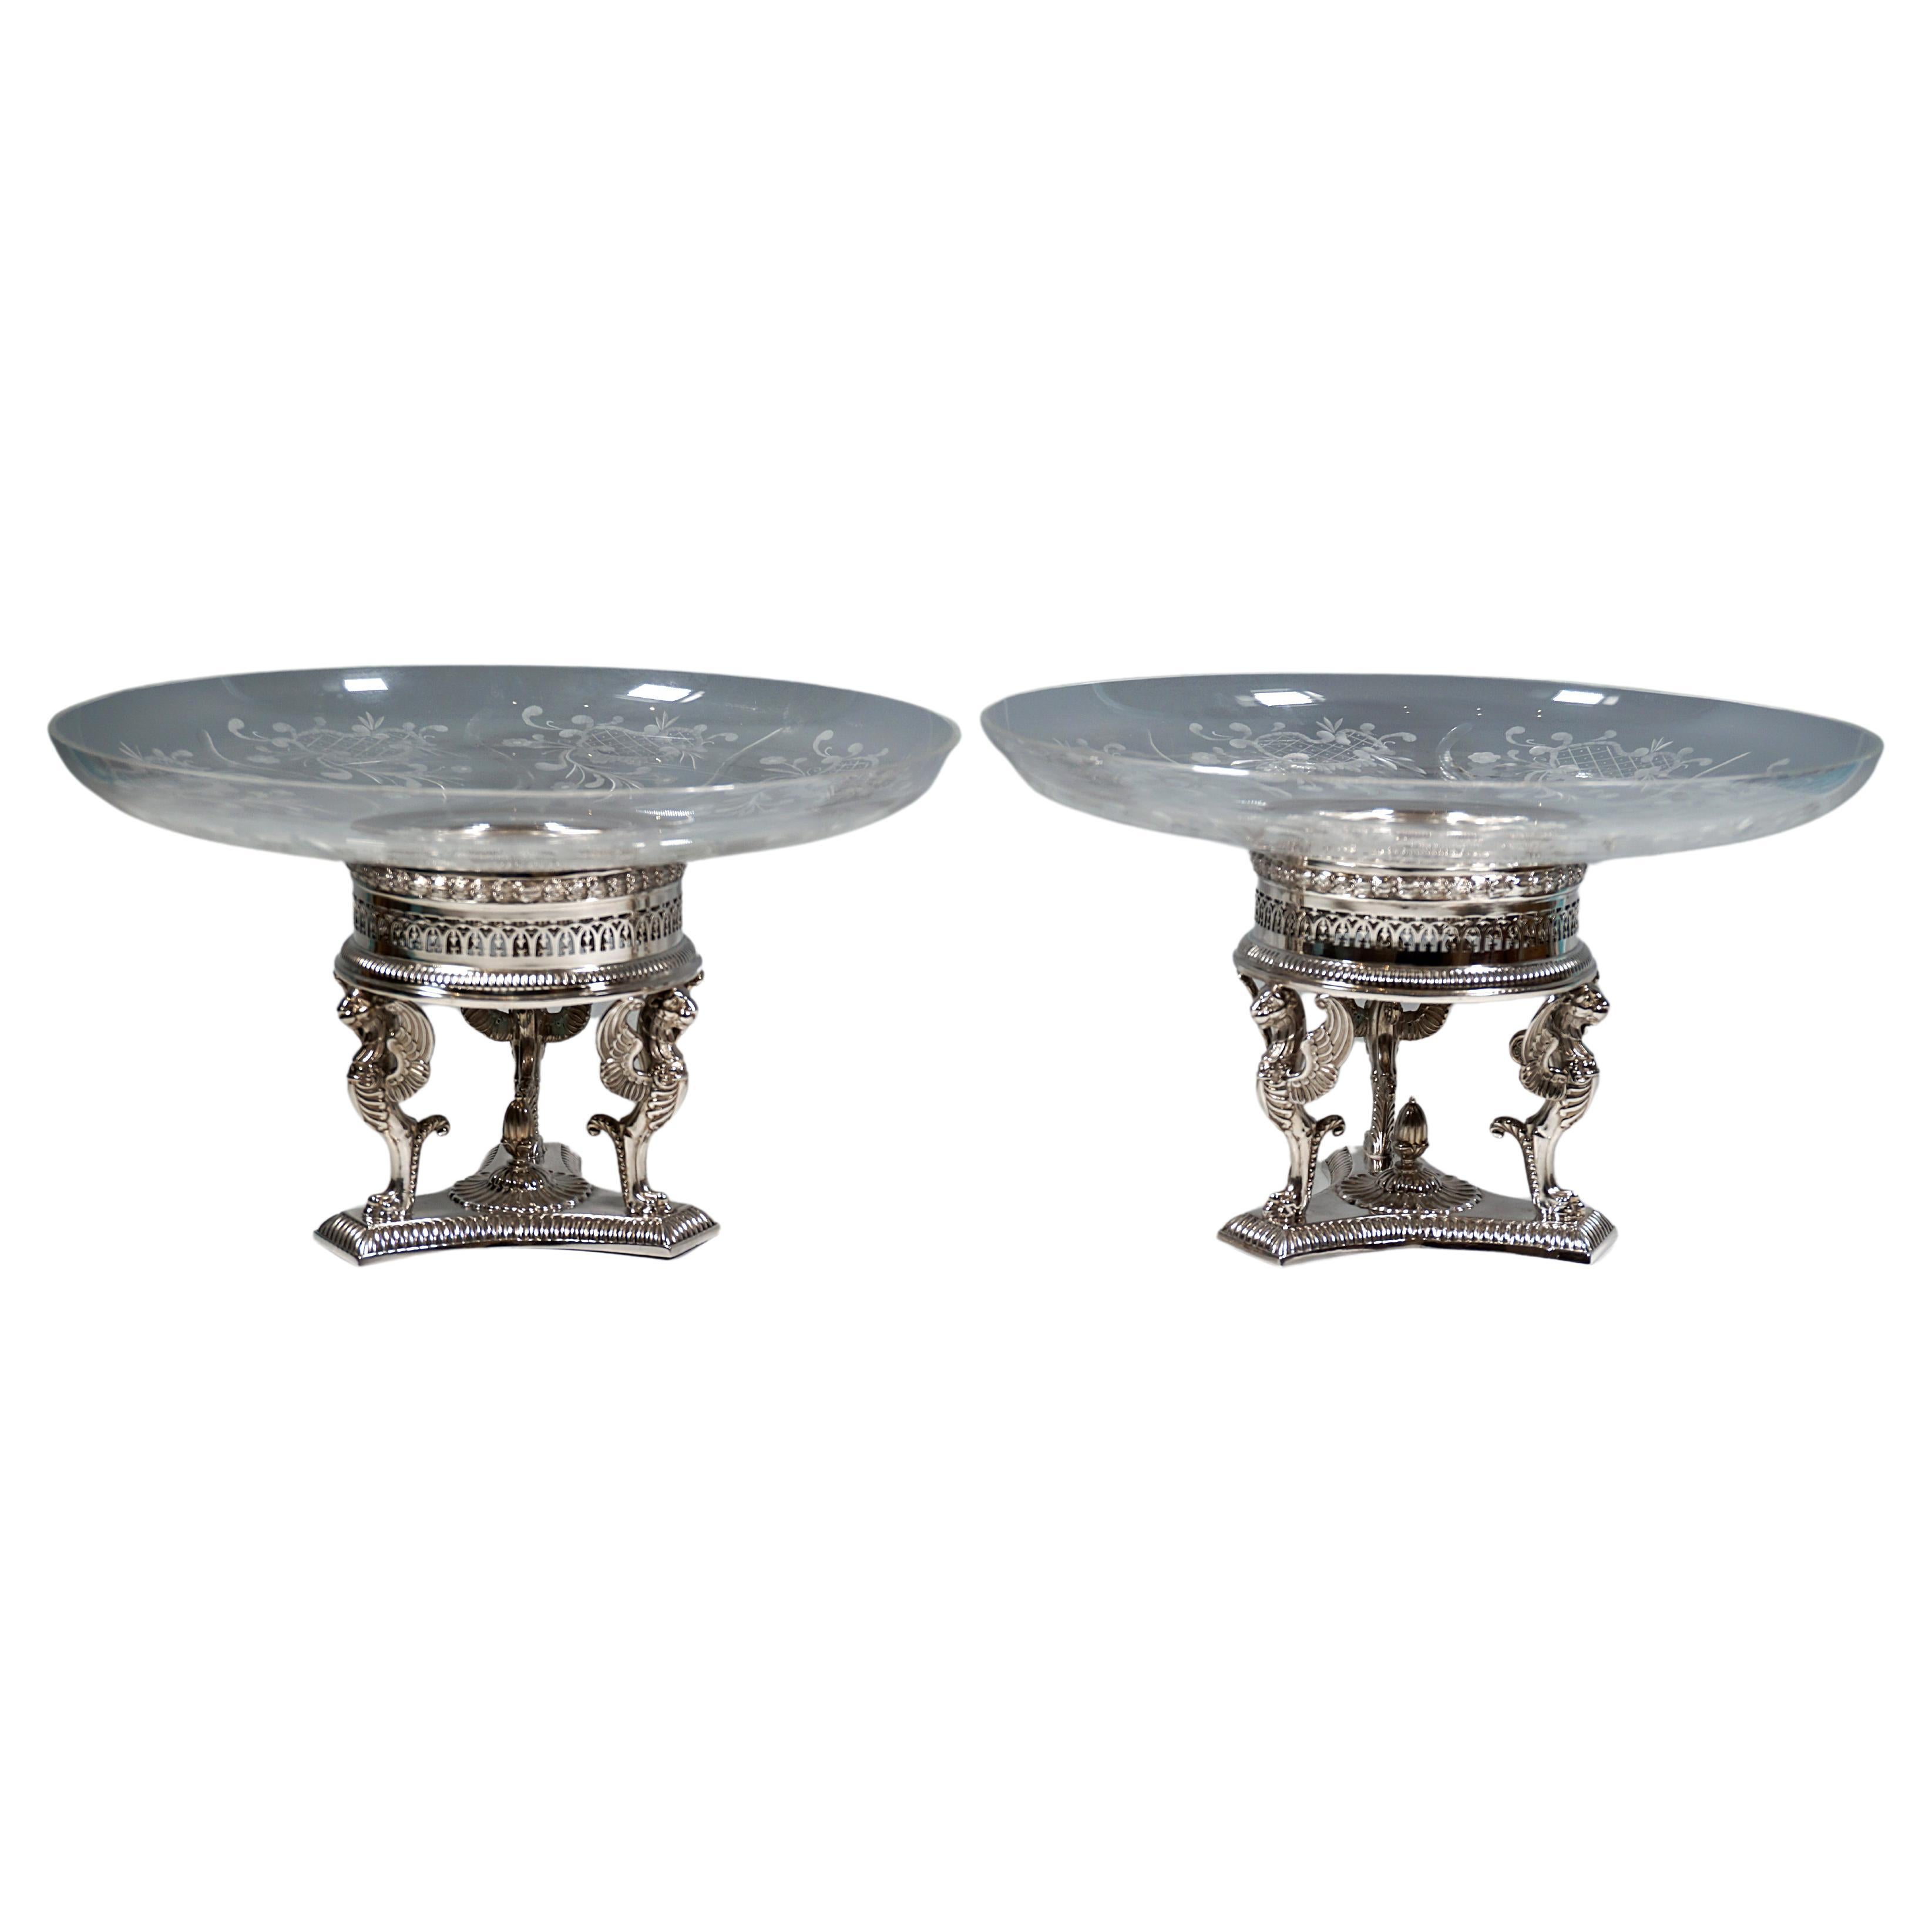 Pair Of Silver Centerpieces With Glass Bowls, Bruckmann & Sons for Knewitz c1920